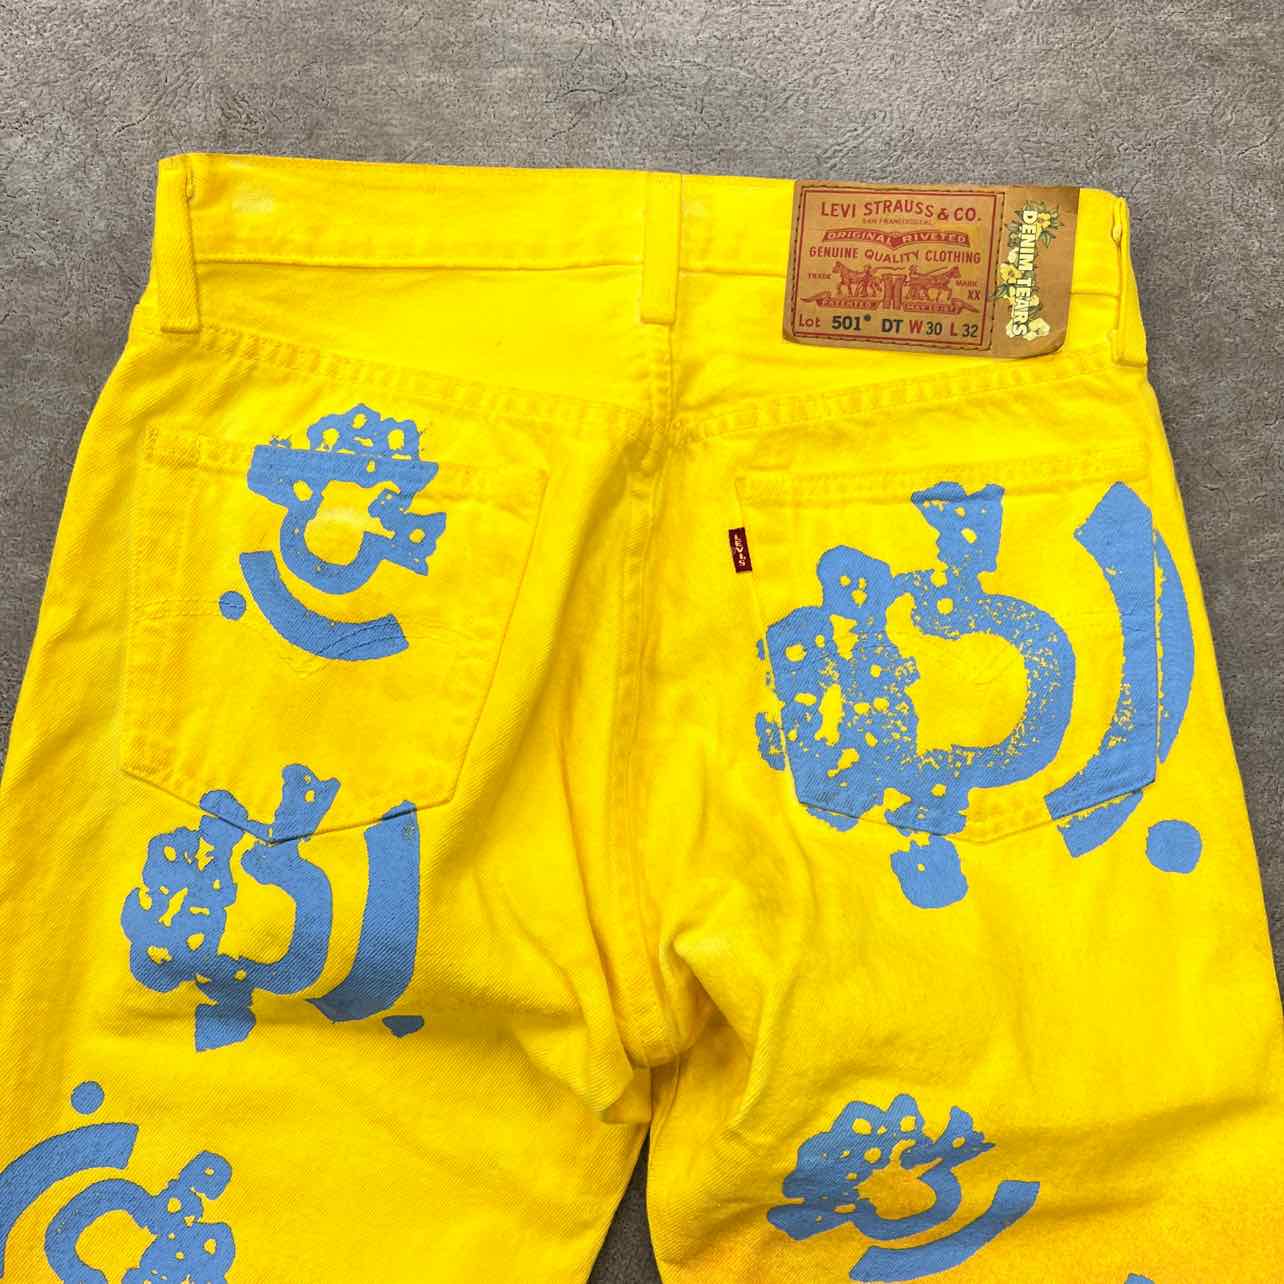 Denim Tears Jeans &quot;BSTROY TEARS&quot; Yellow Used Size 30